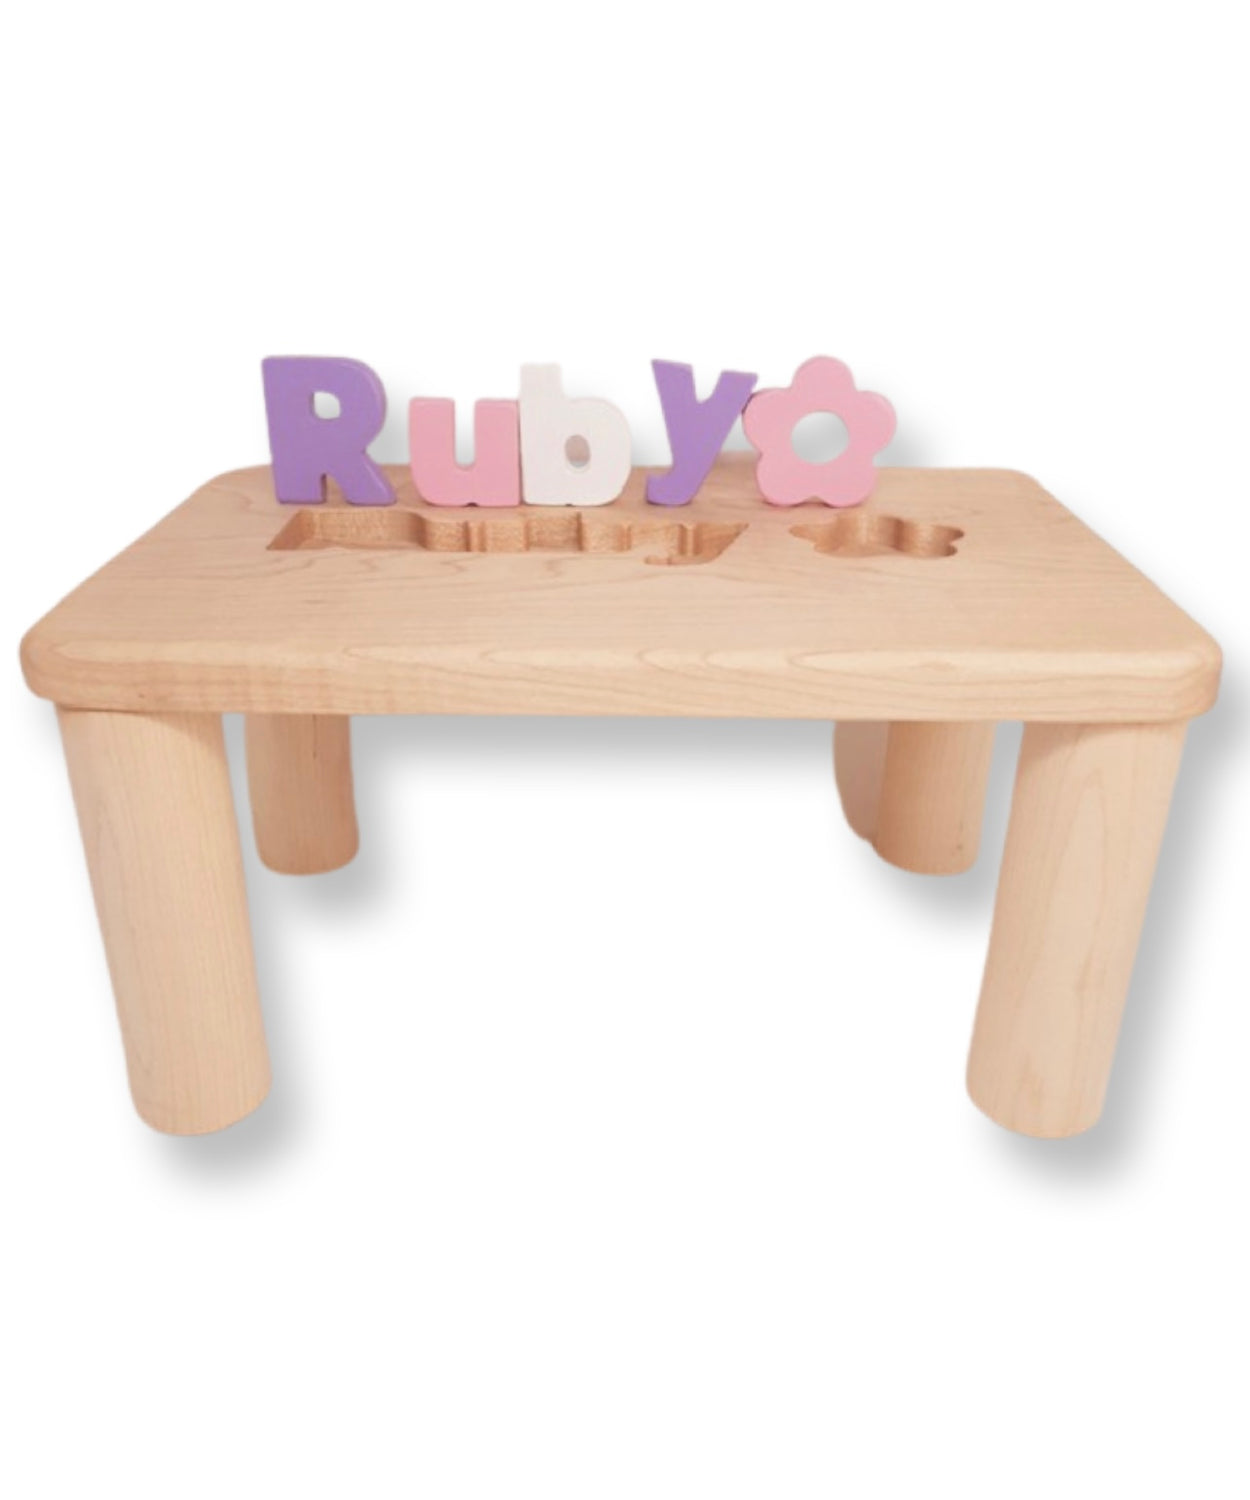 Personalized Puzzle Name Bench w/Flower